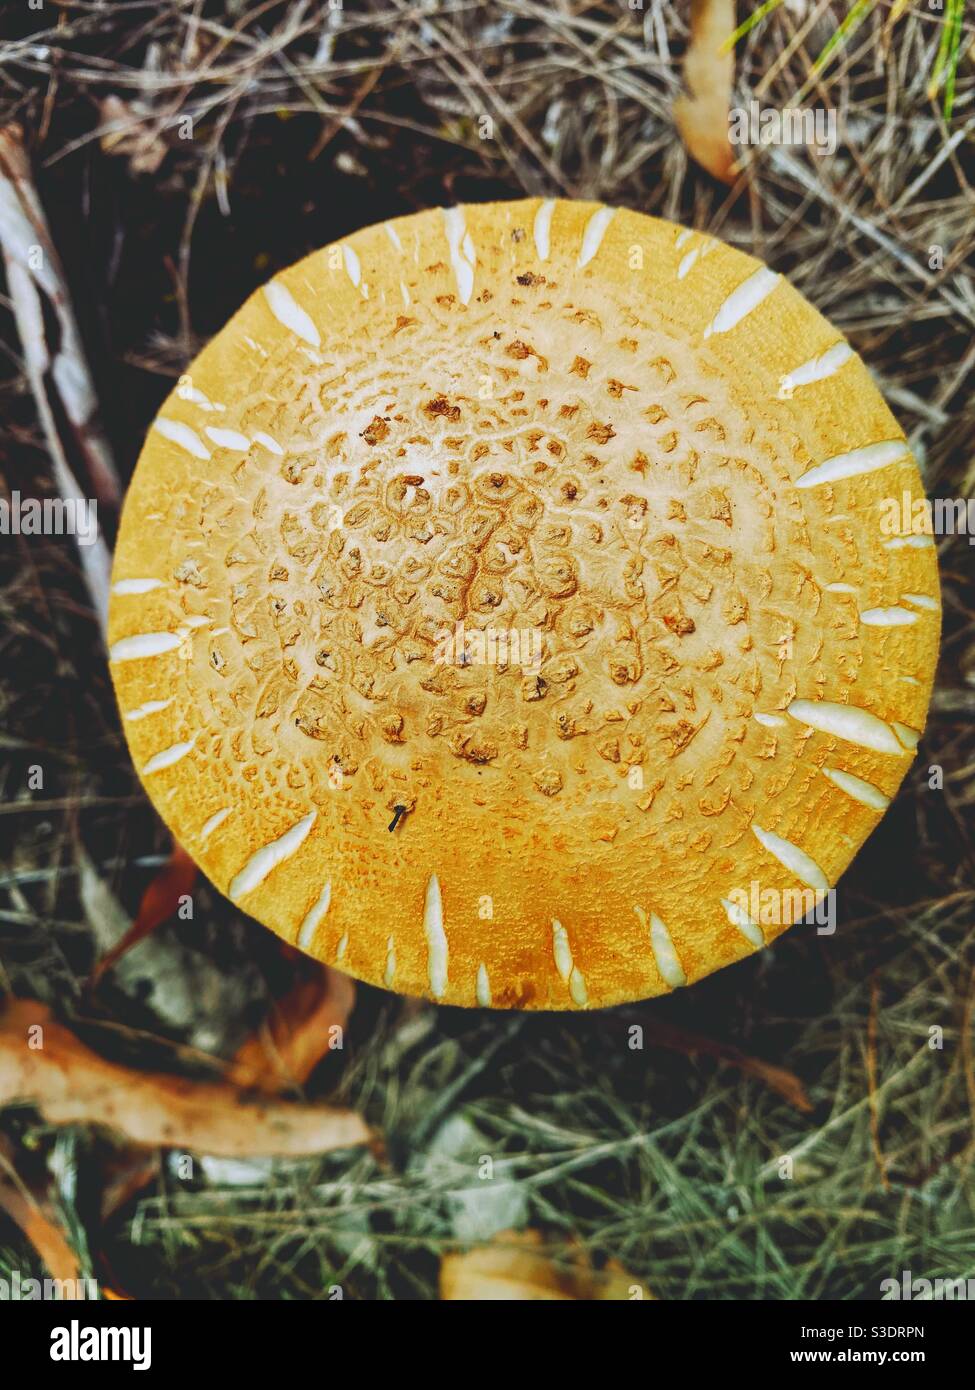 Close up detail from above of field mushroom growing in Australian grasslands. Vertical detail of large flap cap mushroom from above. Stock Photo